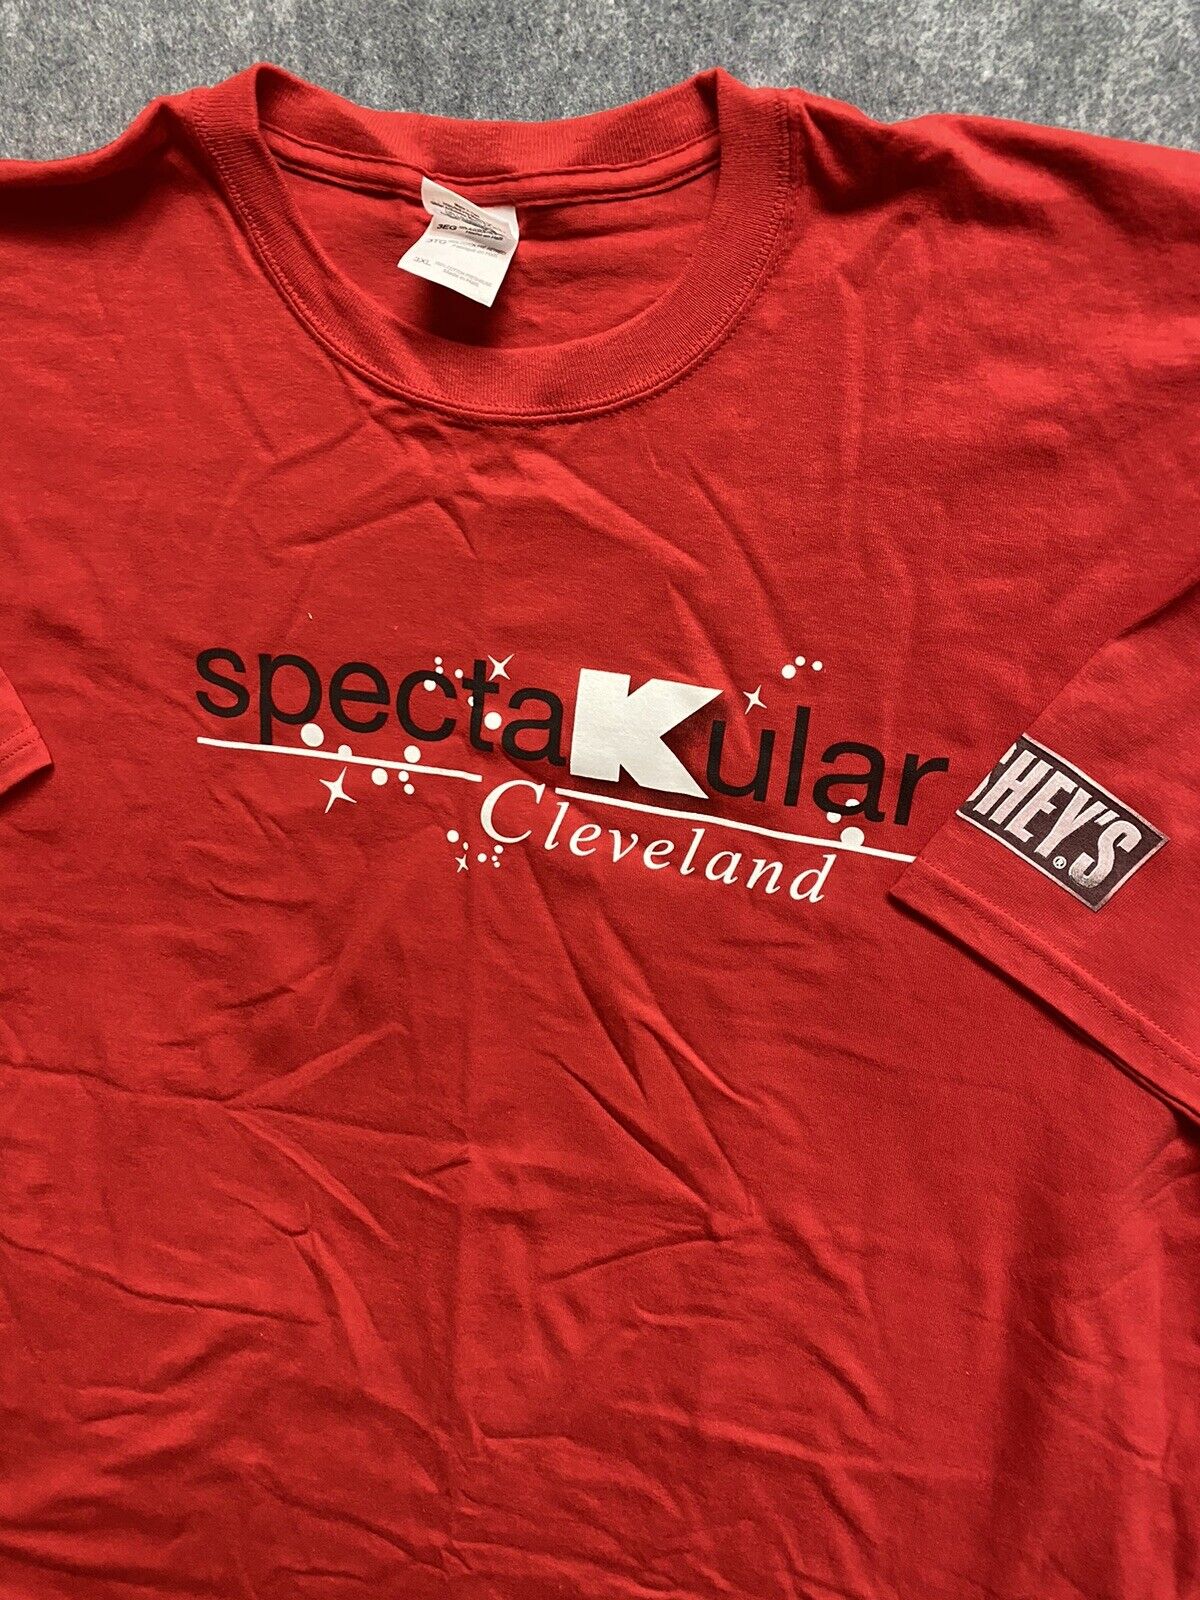 Authentic Kmart Cleveland 'SpectaKular' Store T Shirt x Hershey's 100%  Cotton 3X